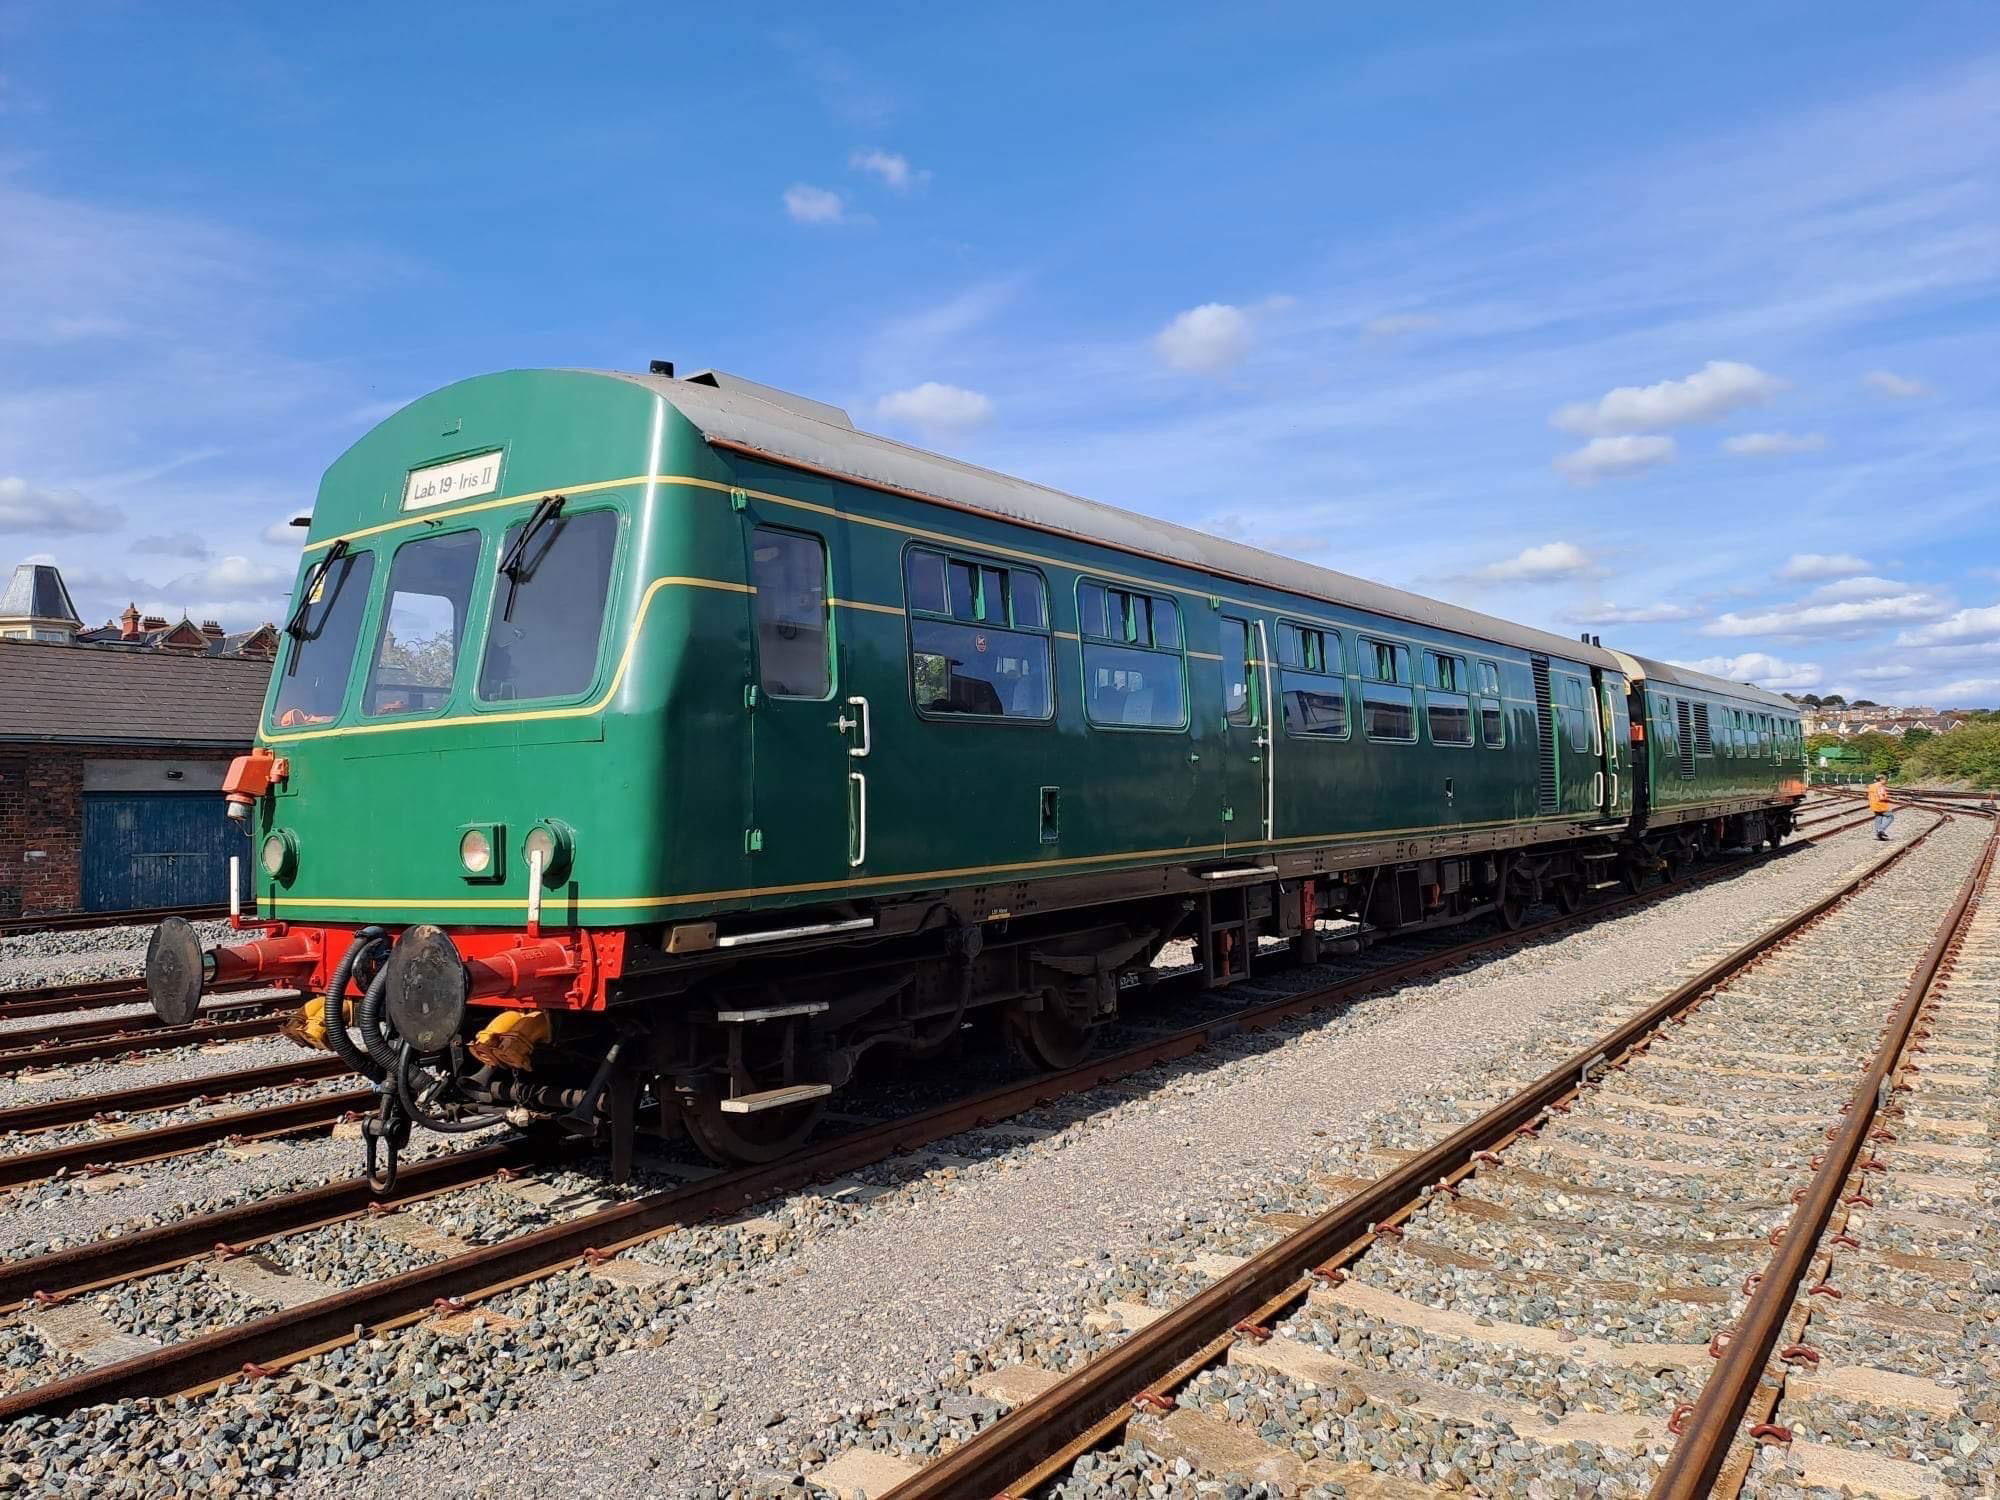 Plym Valley Railway purchases 101